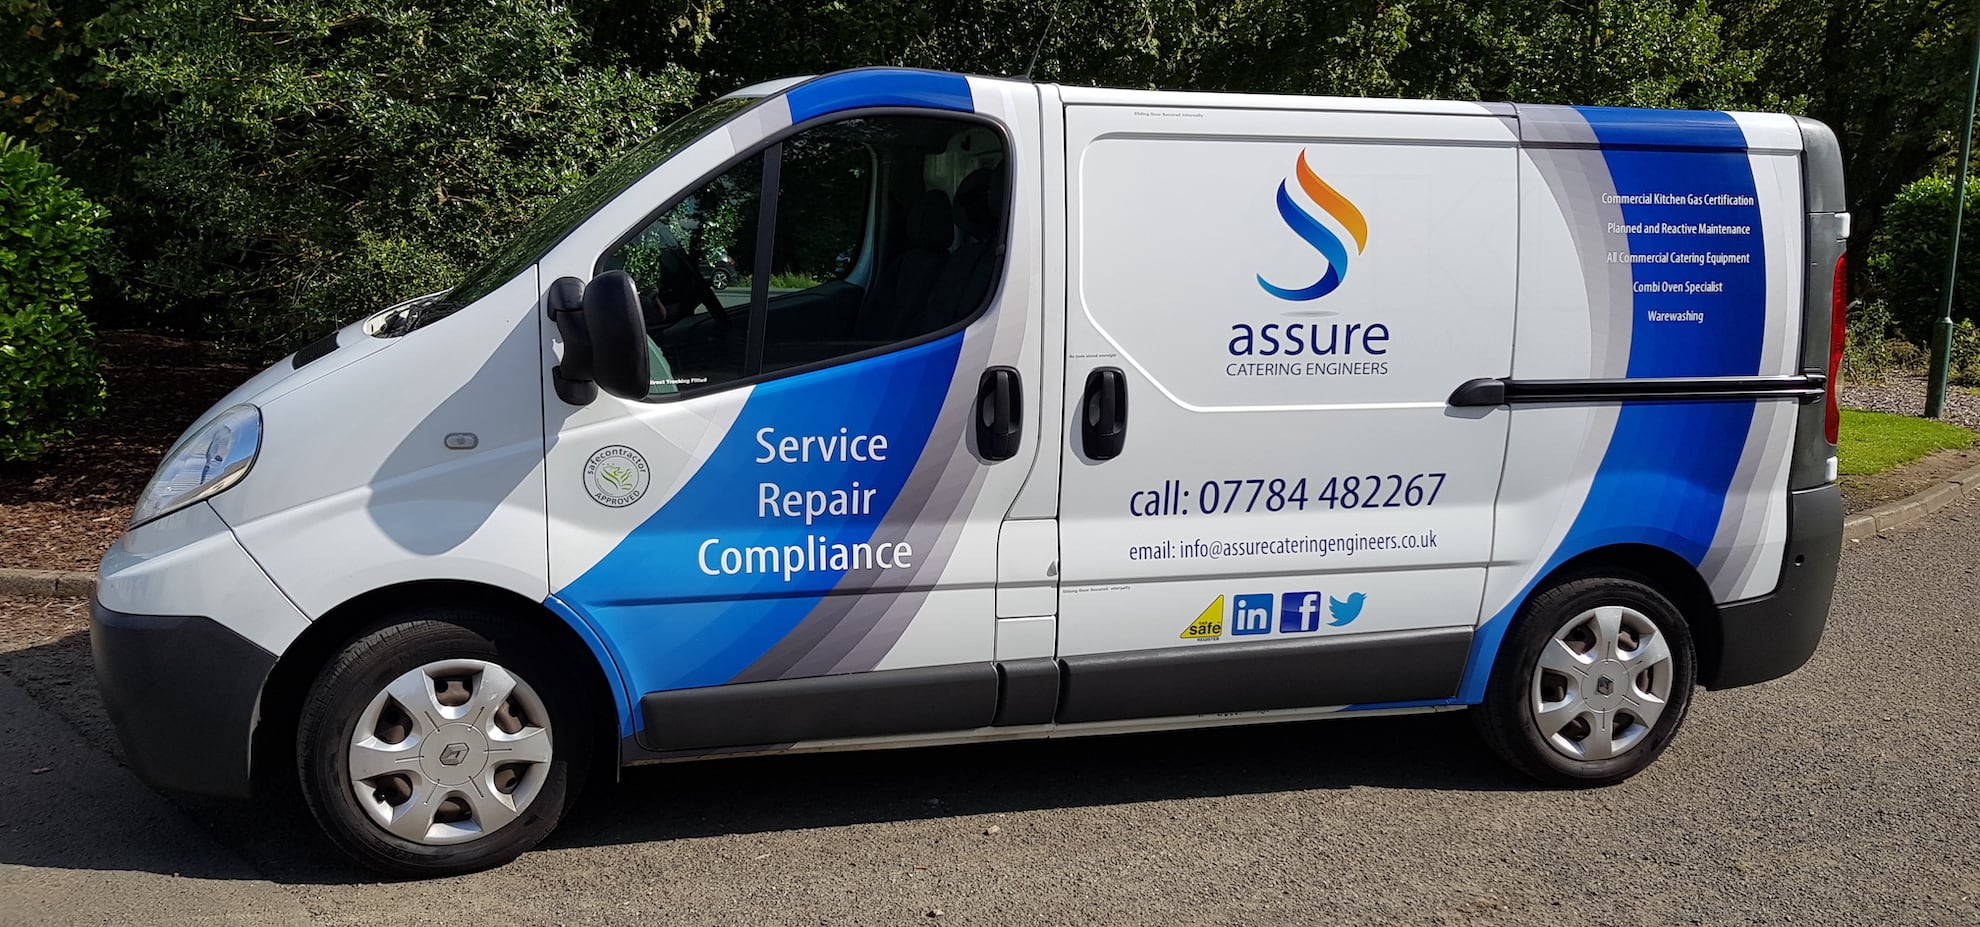 Contact Us | Assure Catering Engineers | Scotland